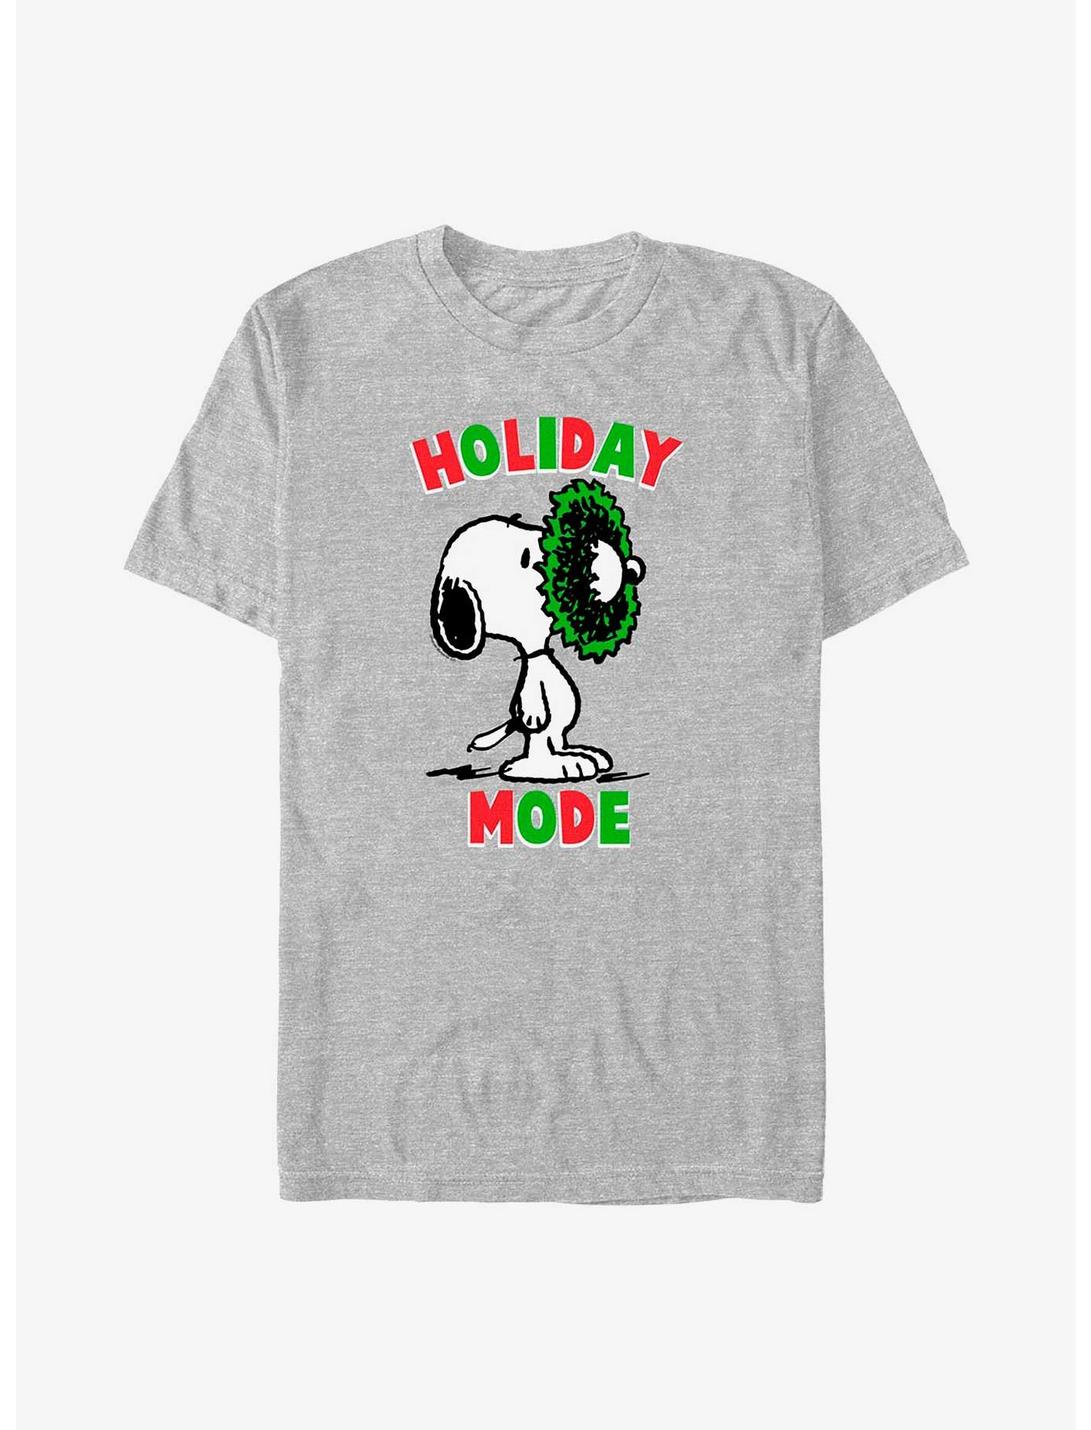 Peanuts Holiday Mode Snoopy Wreath T-Shirt, ATH HTR, hi-res